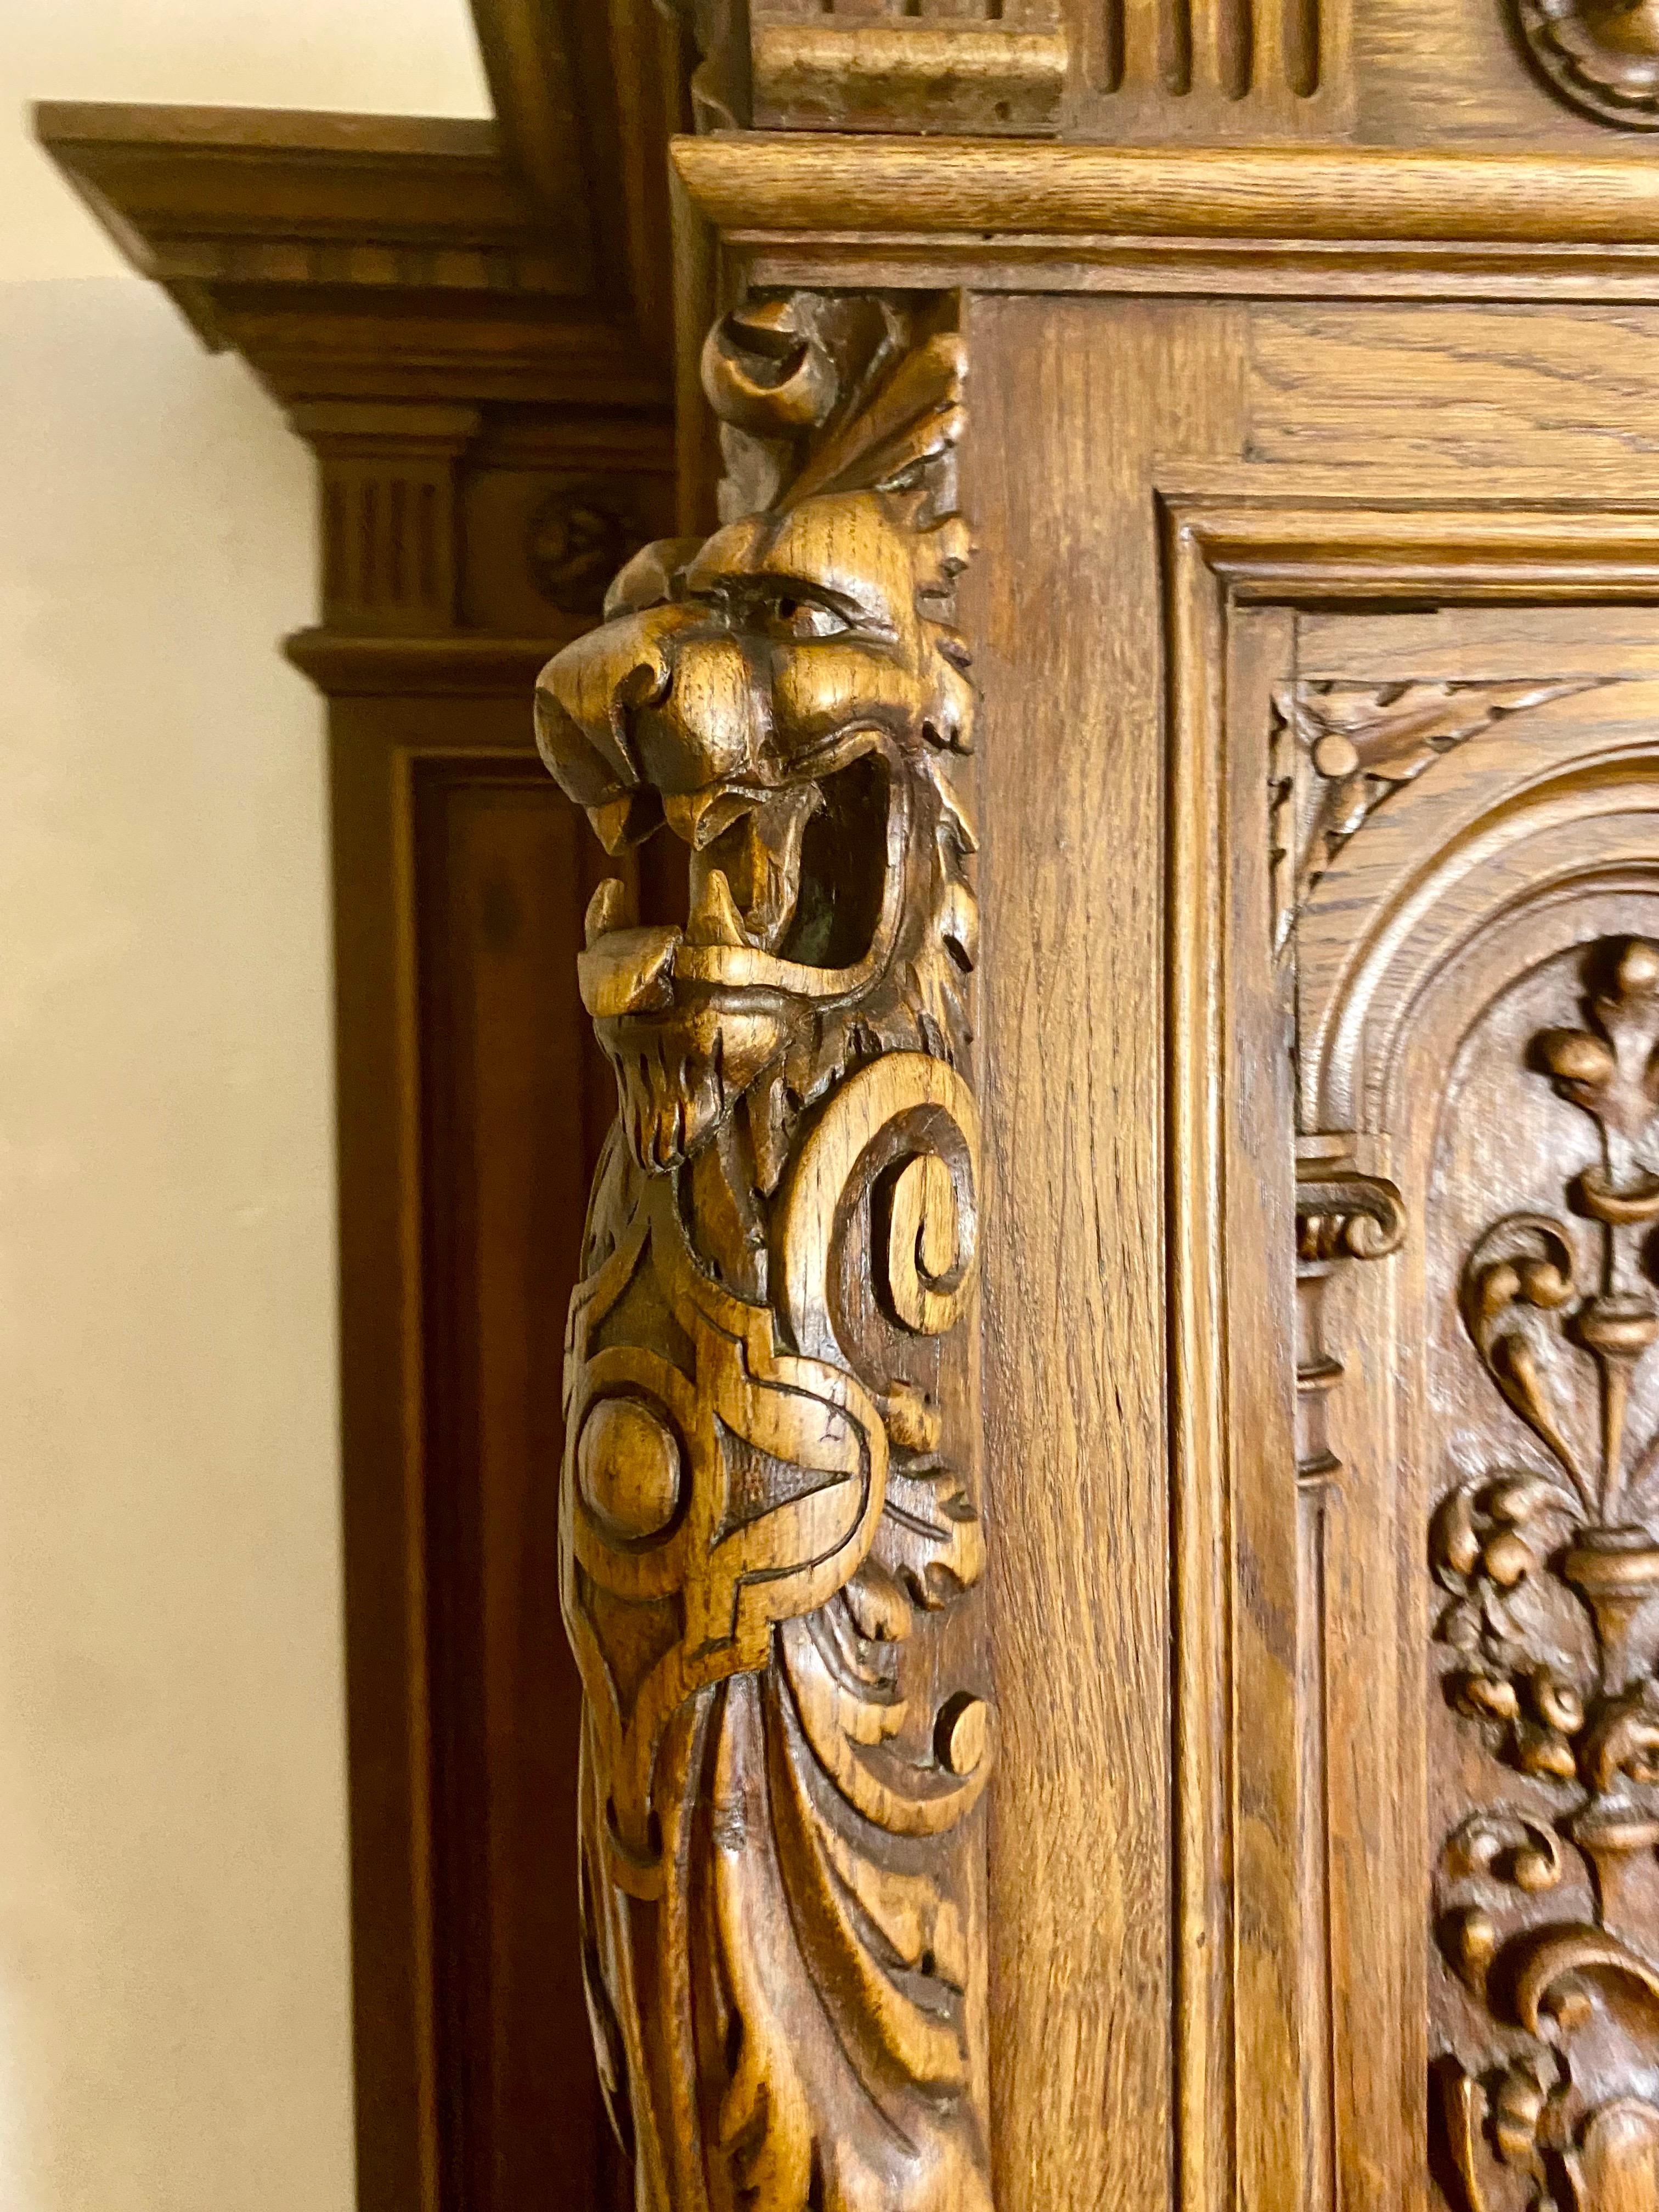 Wonderful castle sideboard, dresser, cabinet, sideboard-credenza in richly carved oak with two-bodies with openings with 2 doors in the upper part and 4 doors in the lower part.
The piece of furniture has 3 drawers carved into belts. The 3 drawers